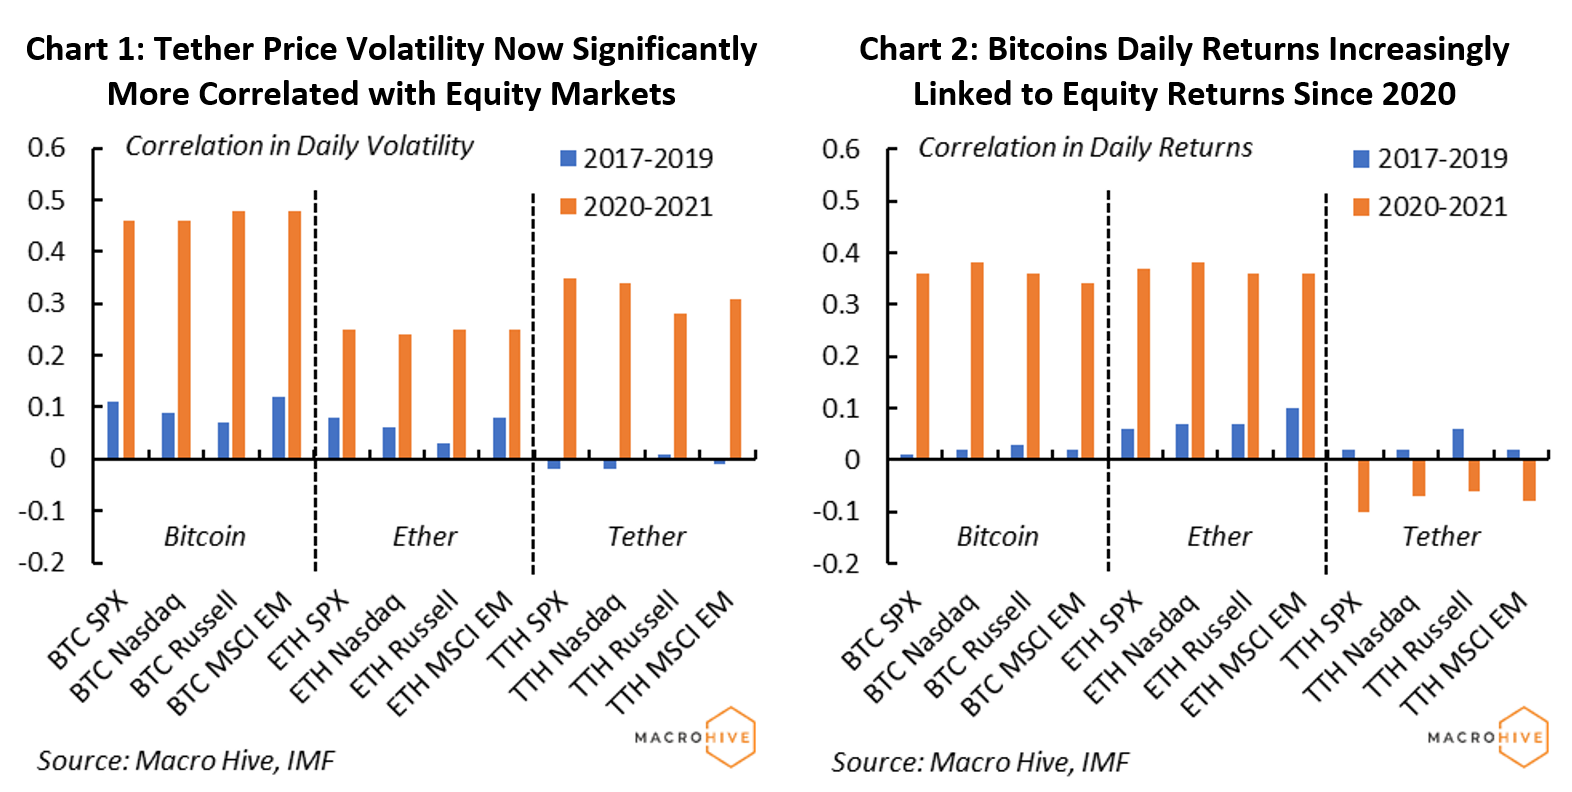 Chart 1: Tether Price Volatility Now Significantly More Correlated with Equity Markets	Chart 2: Bitcoins Daily Returns Increasingly Linked to Equity Returns Since 2020